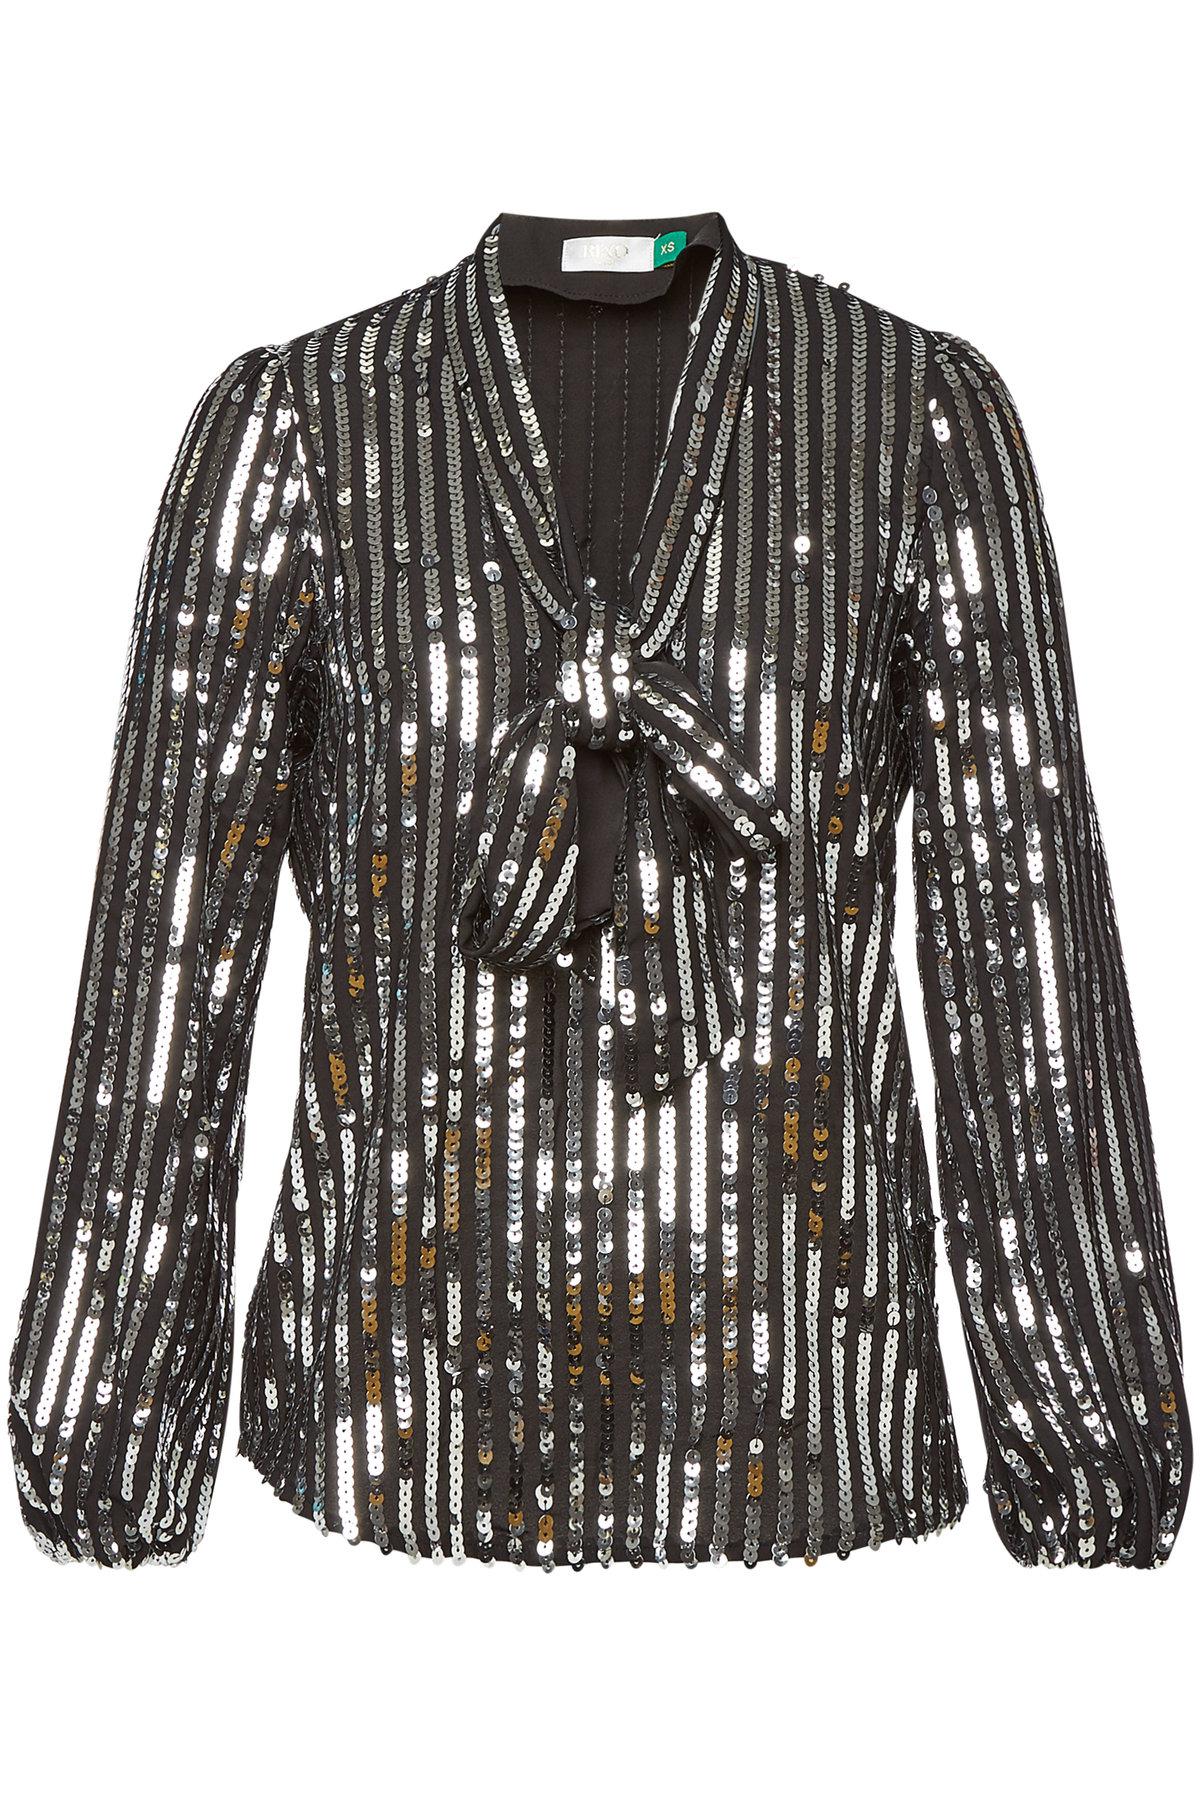 Rixo London Moss Sequin Top With Self 